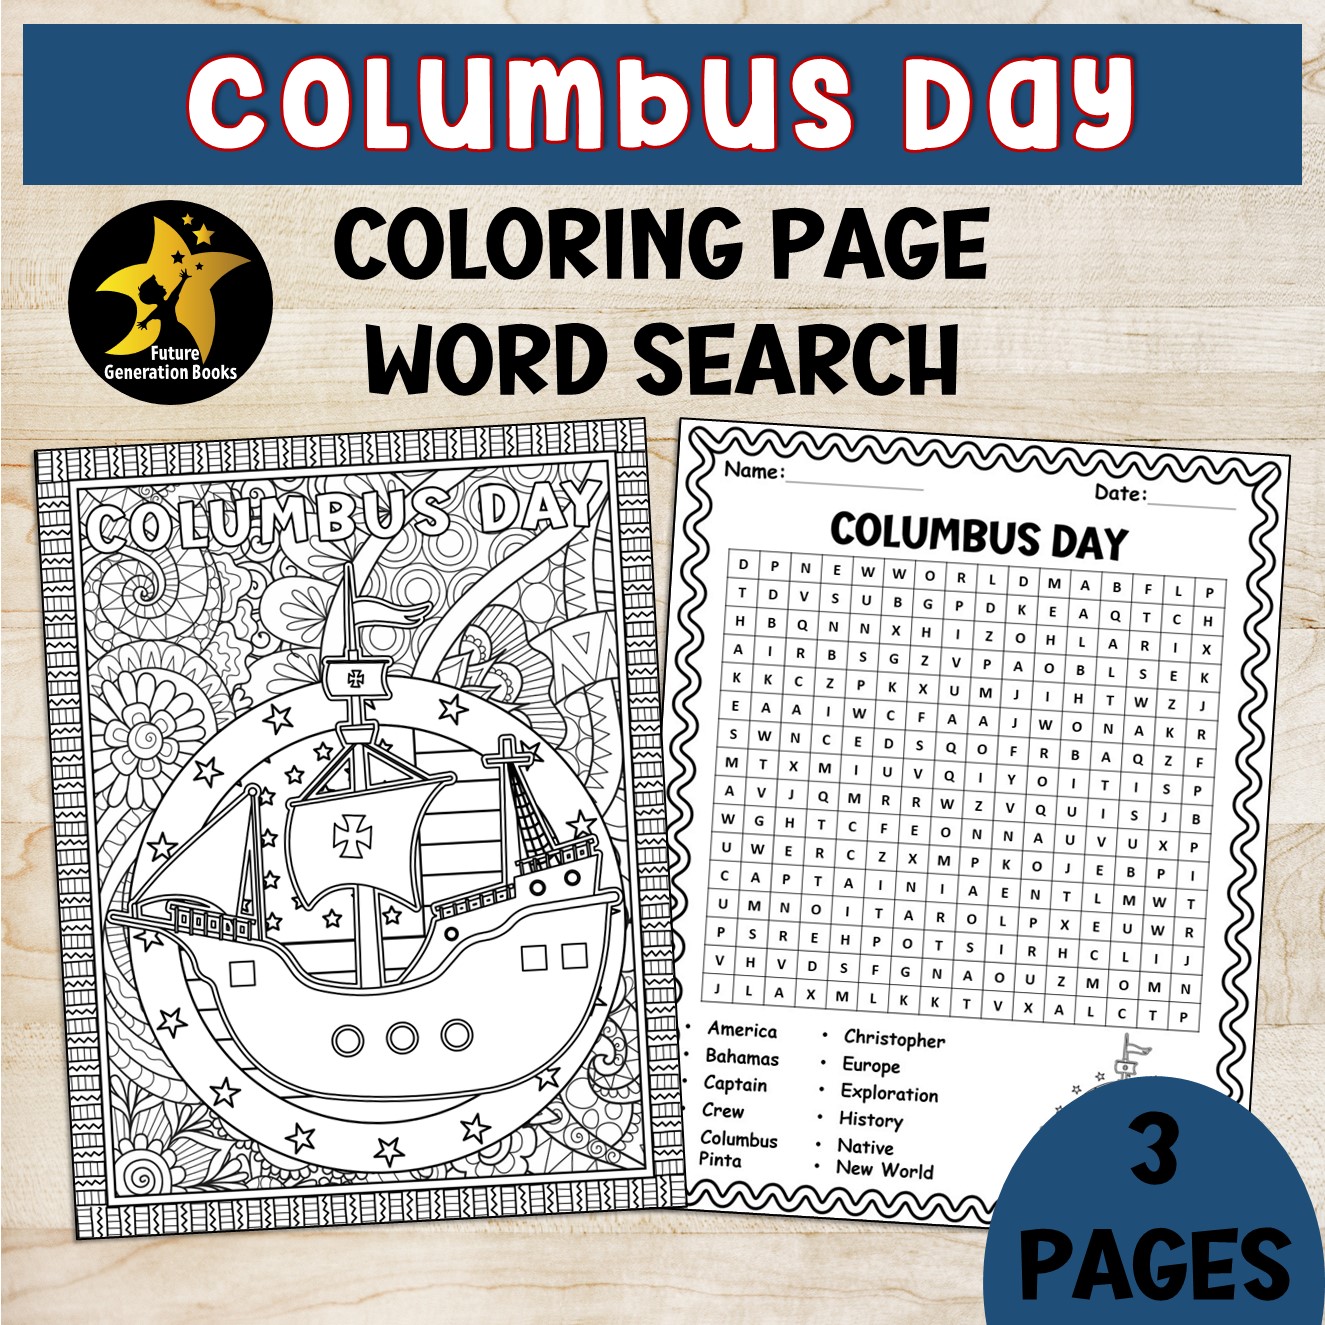 Columbus day activities word search coloring page october worksheets made by teachers